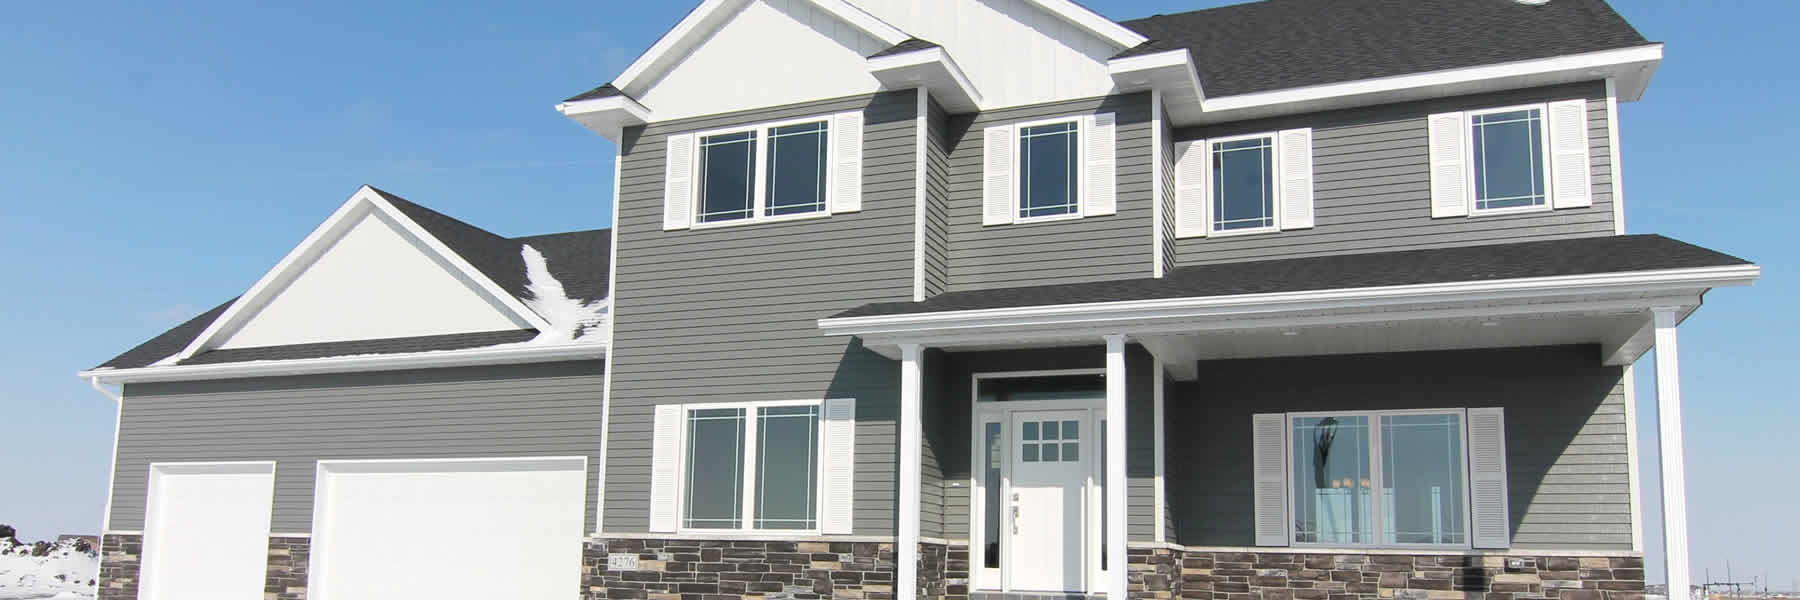 Contact T&S Custom Homes to build your specialty home in Fargo-Moorhead.